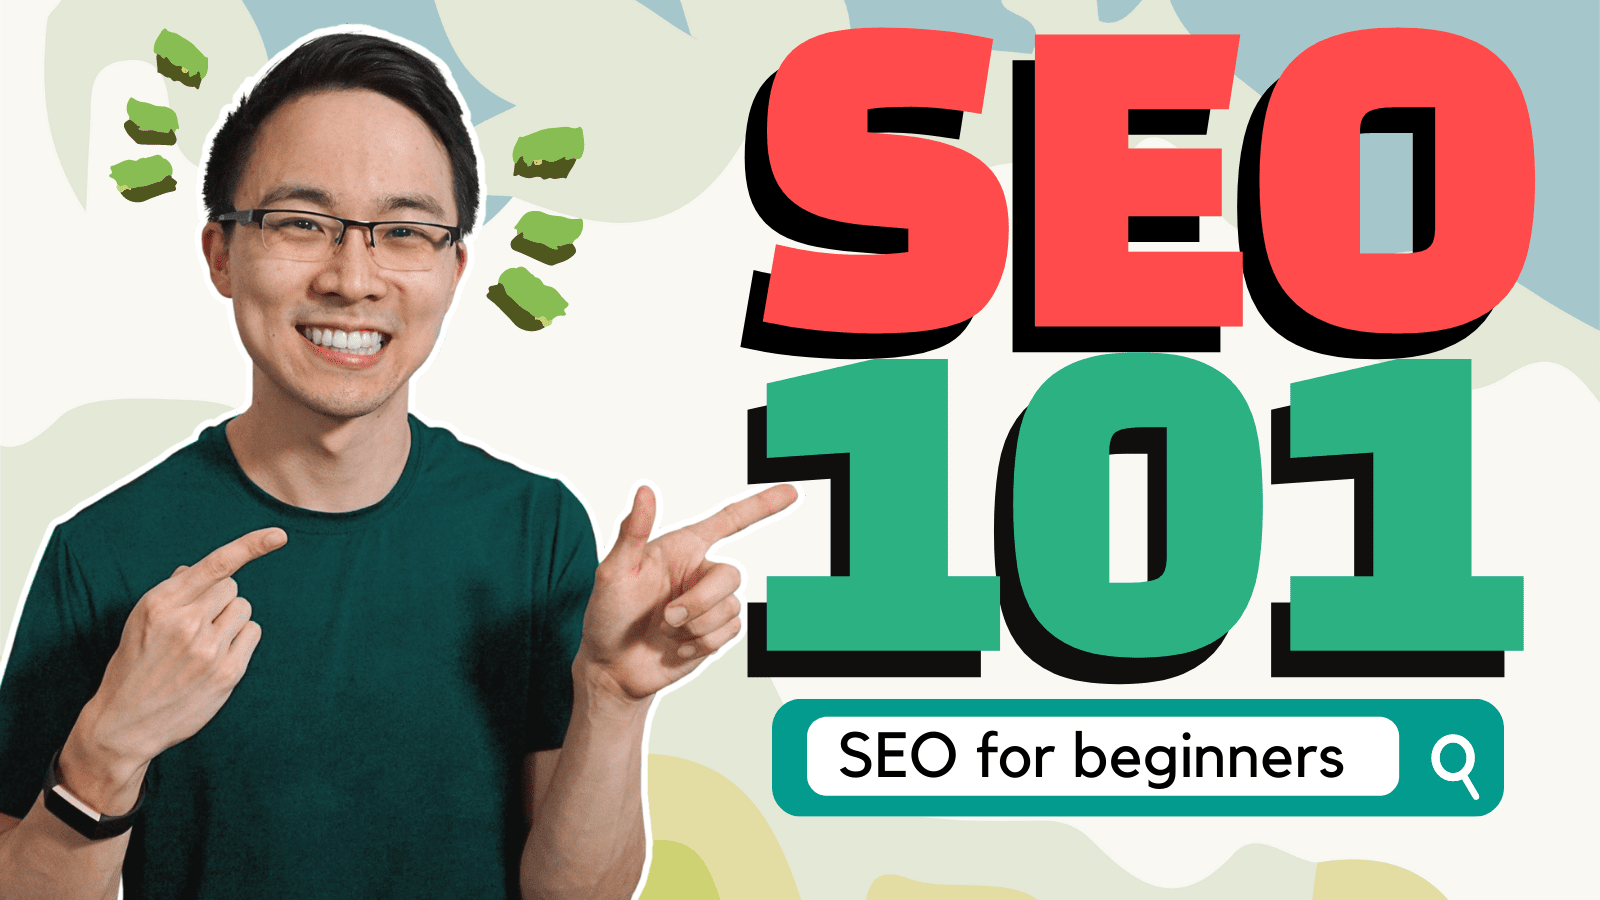 An Easier Way to Think About SEO for Non-SEO People